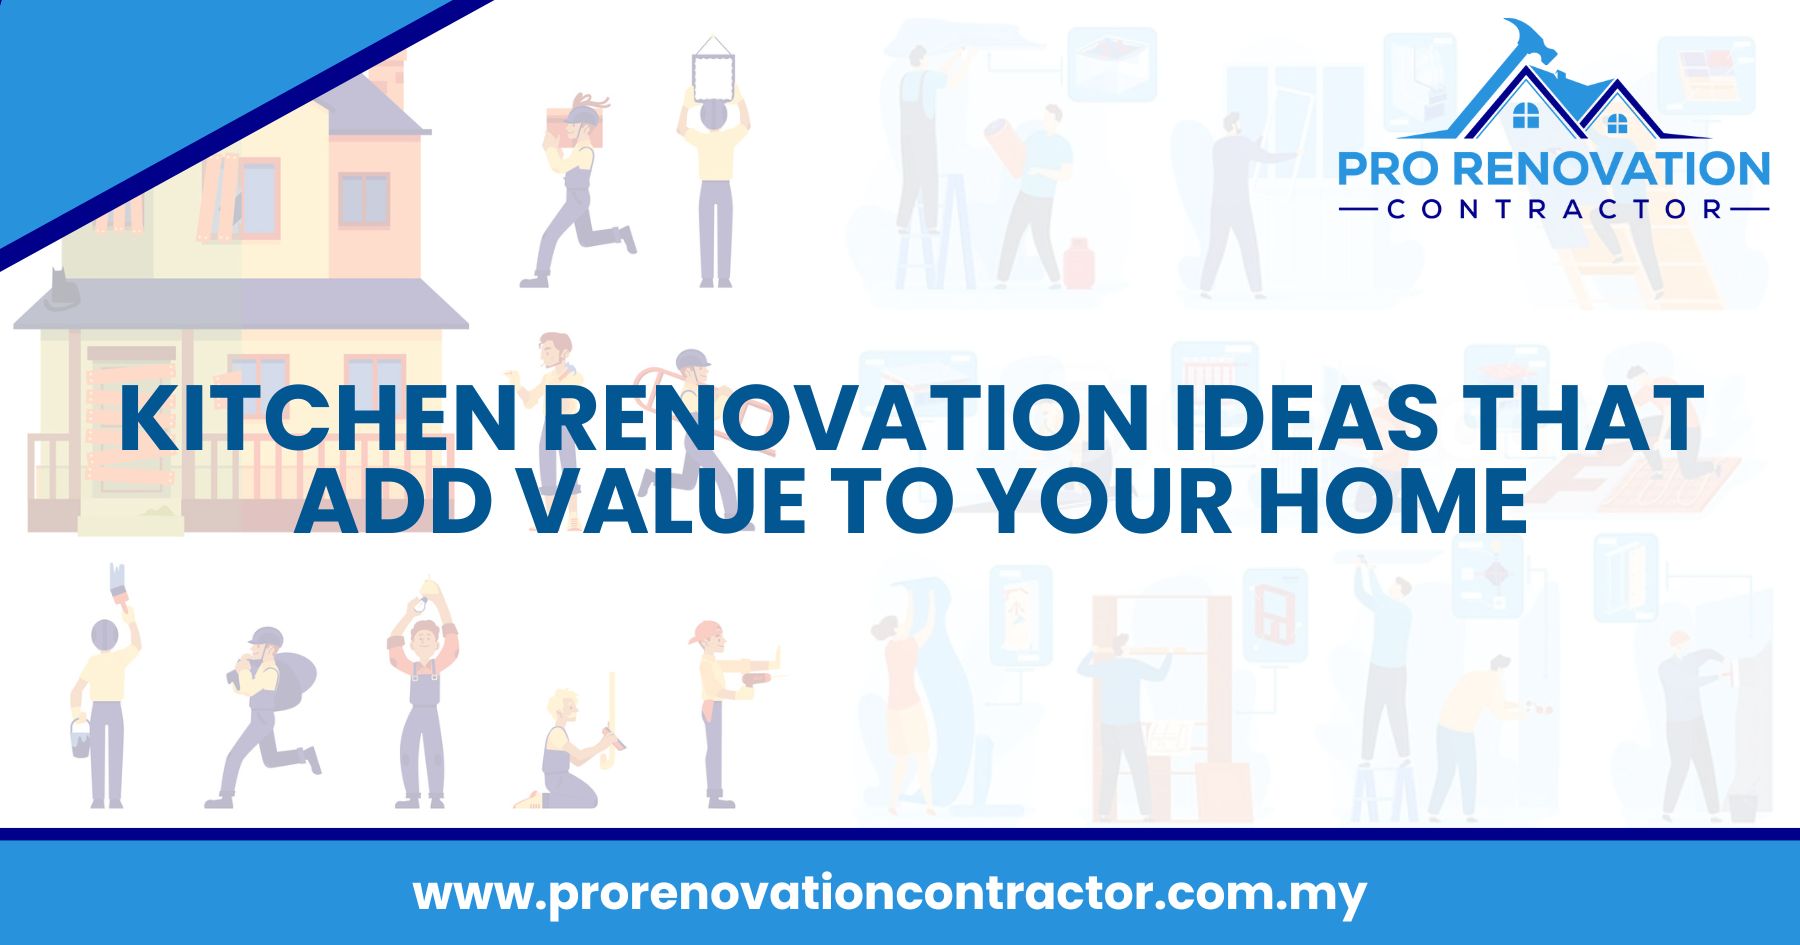 Kitchen Renovation Ideas That Add Value to Your Home